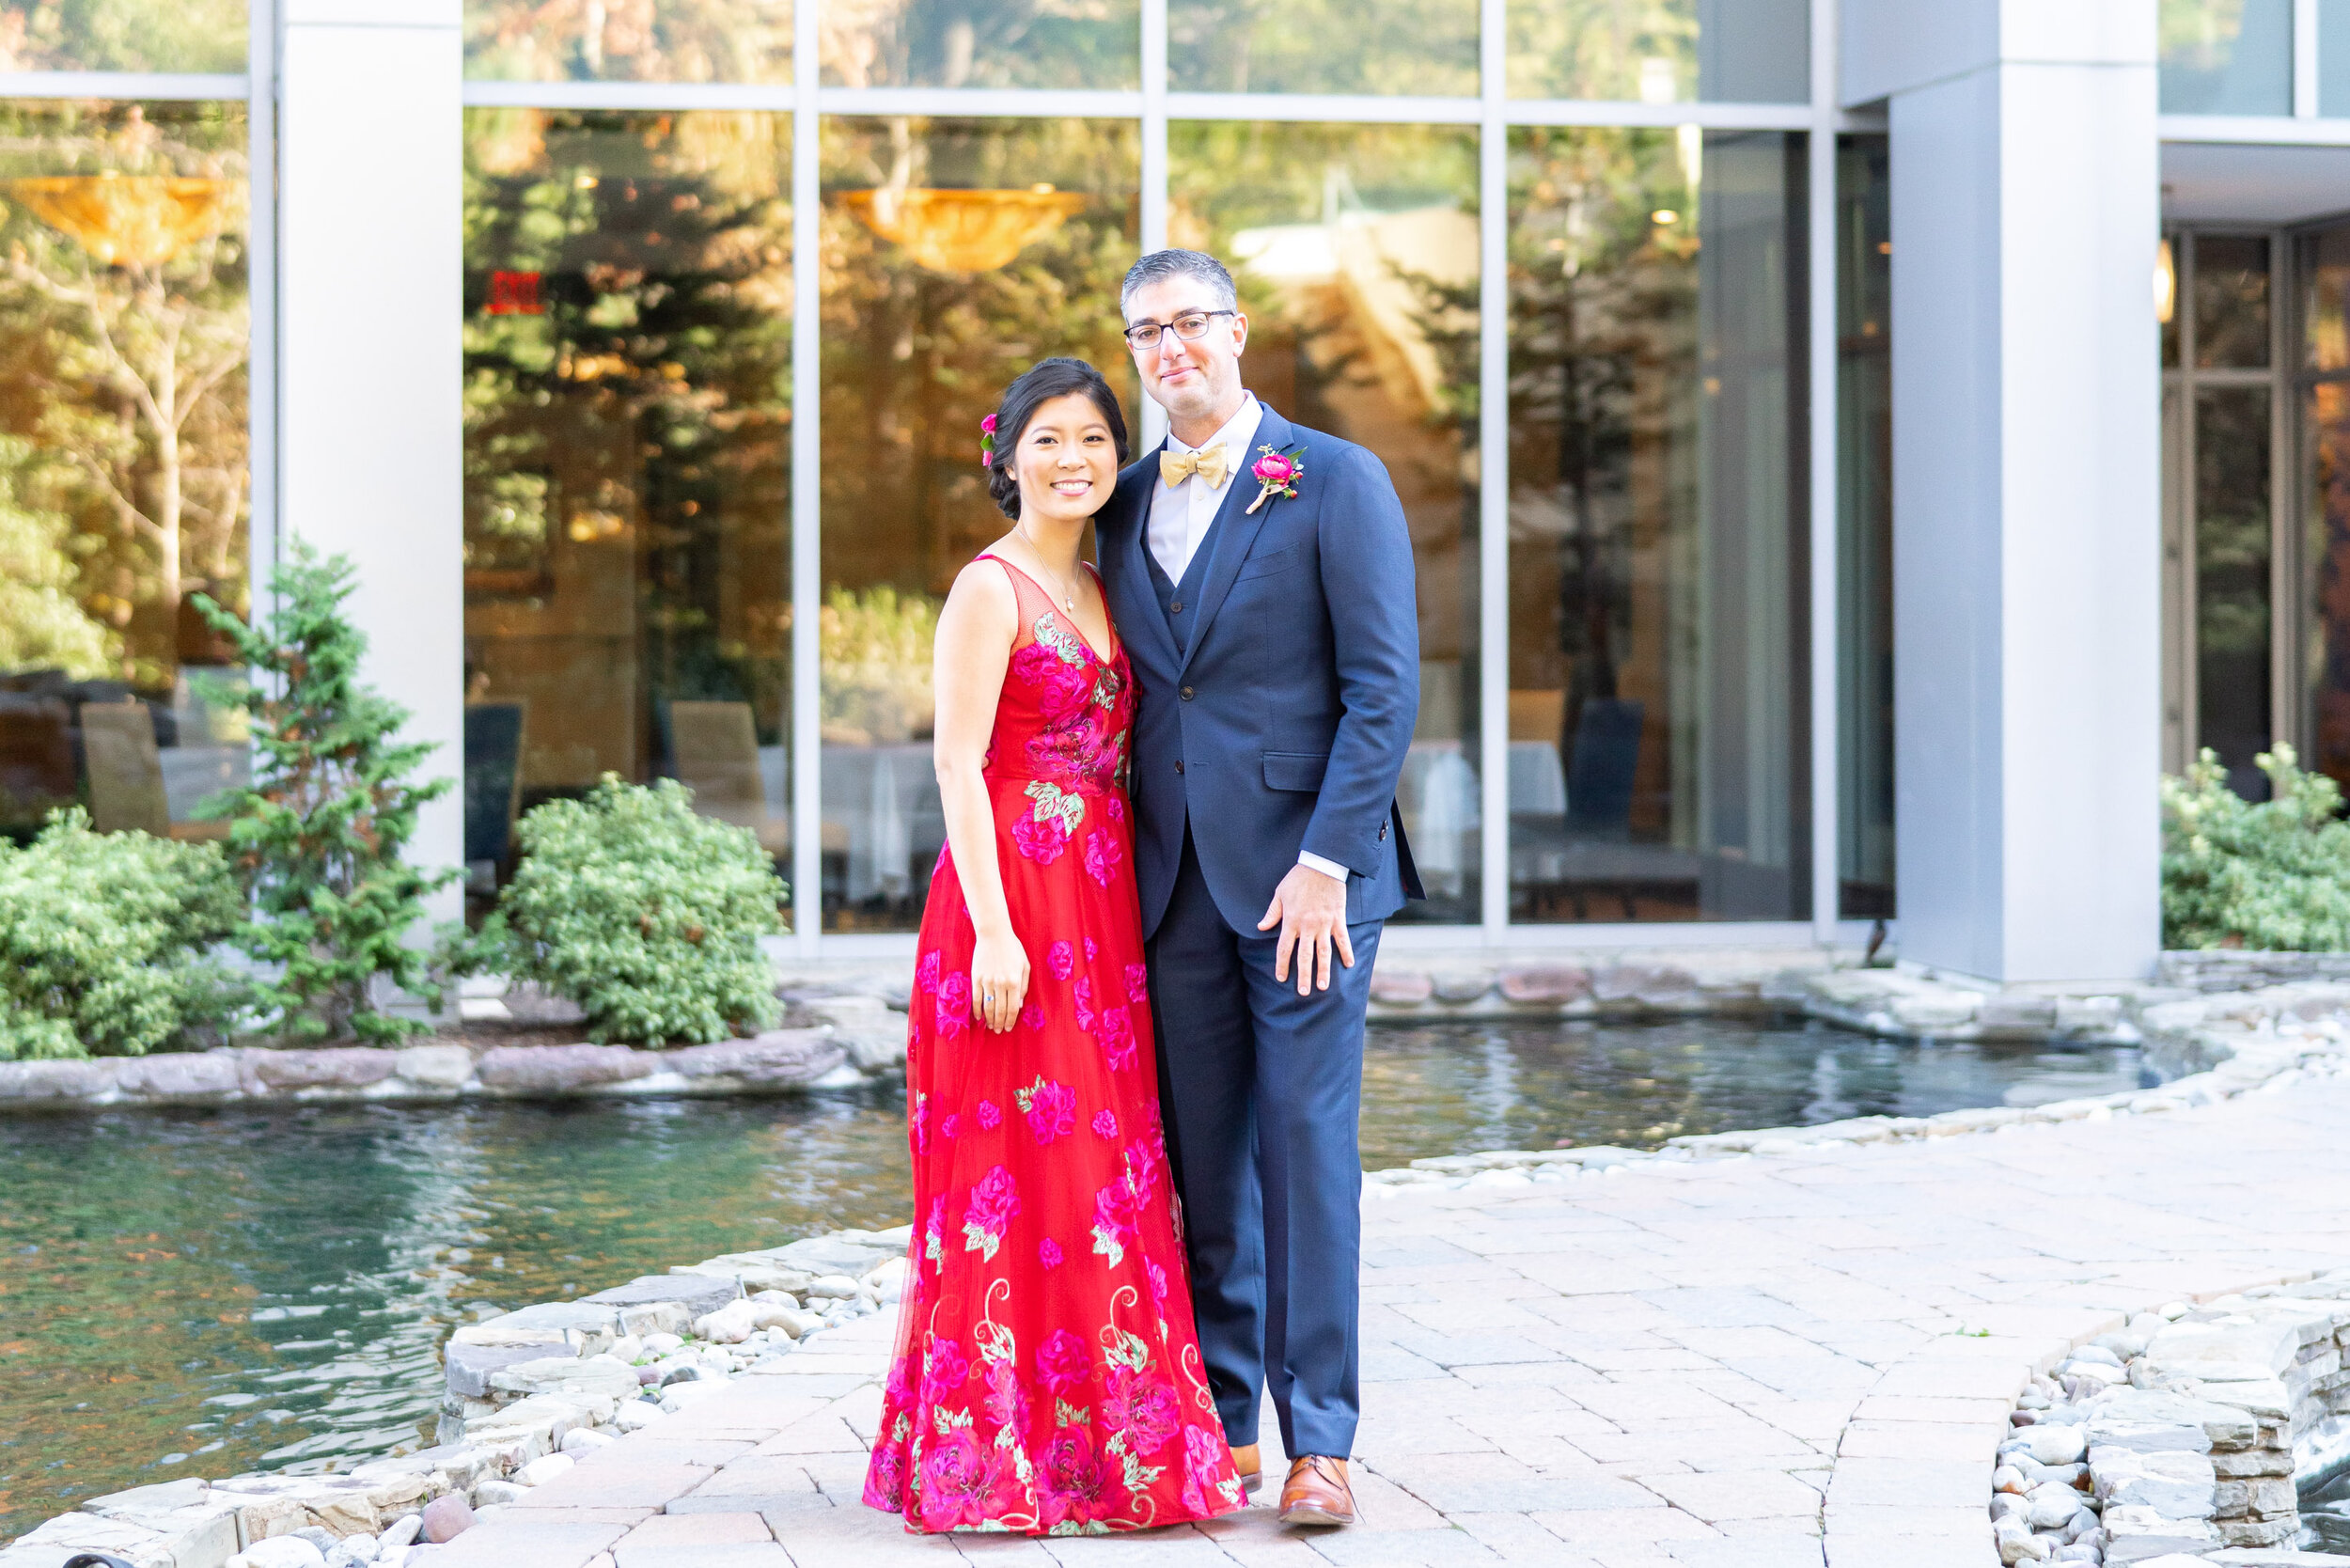 Beautiful wedding portraits of bride and groom at 2941 restaurant 